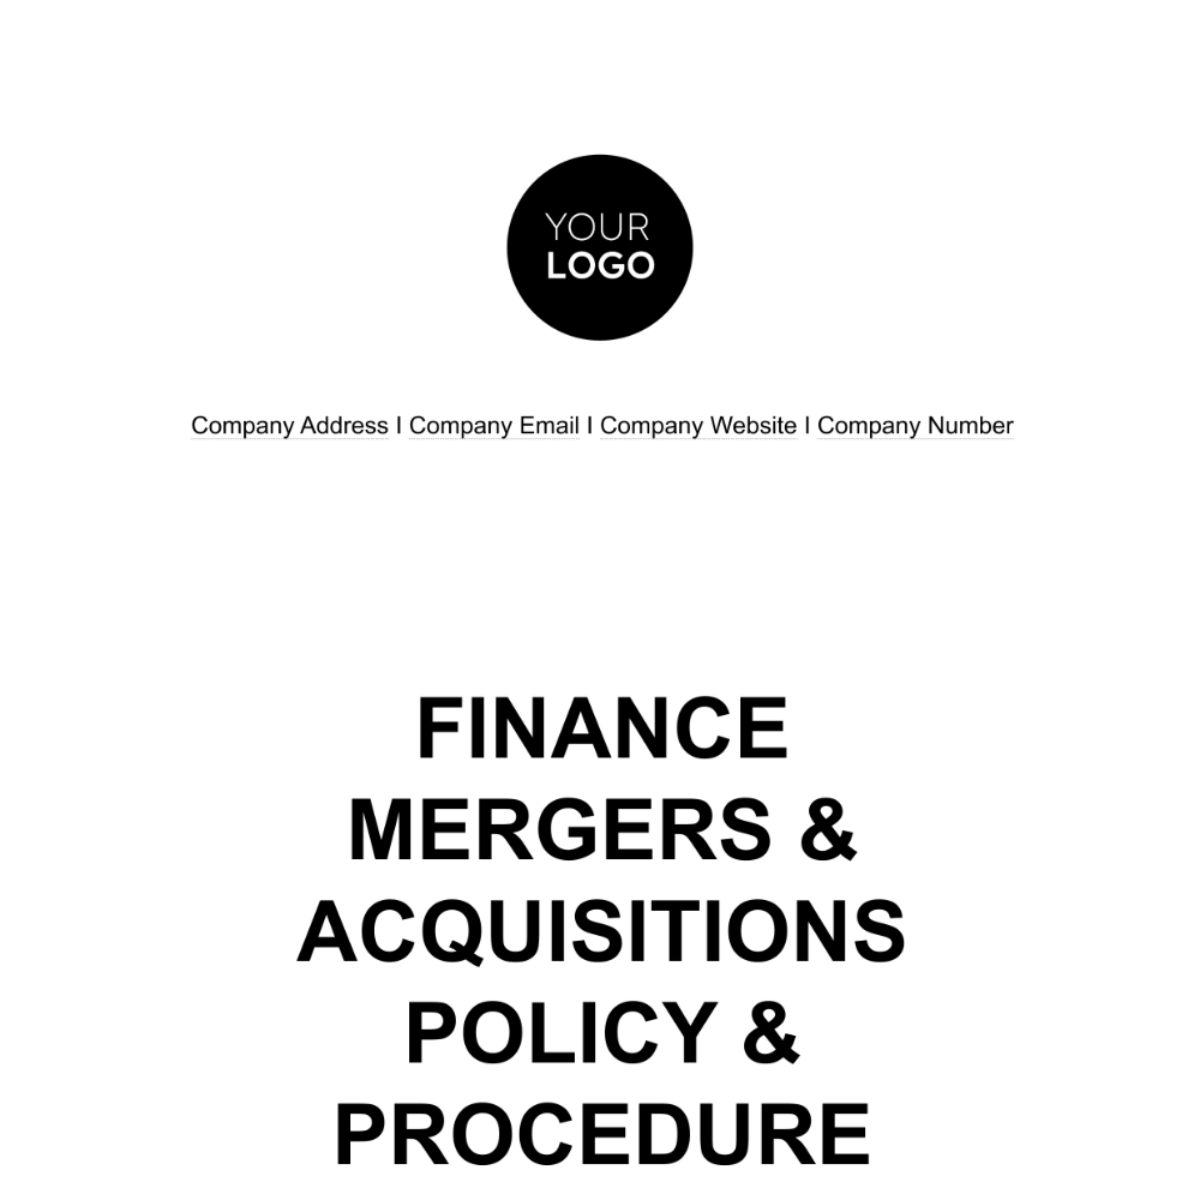 Finance Mergers & Acquisitions Policy & Procedure Manual Template